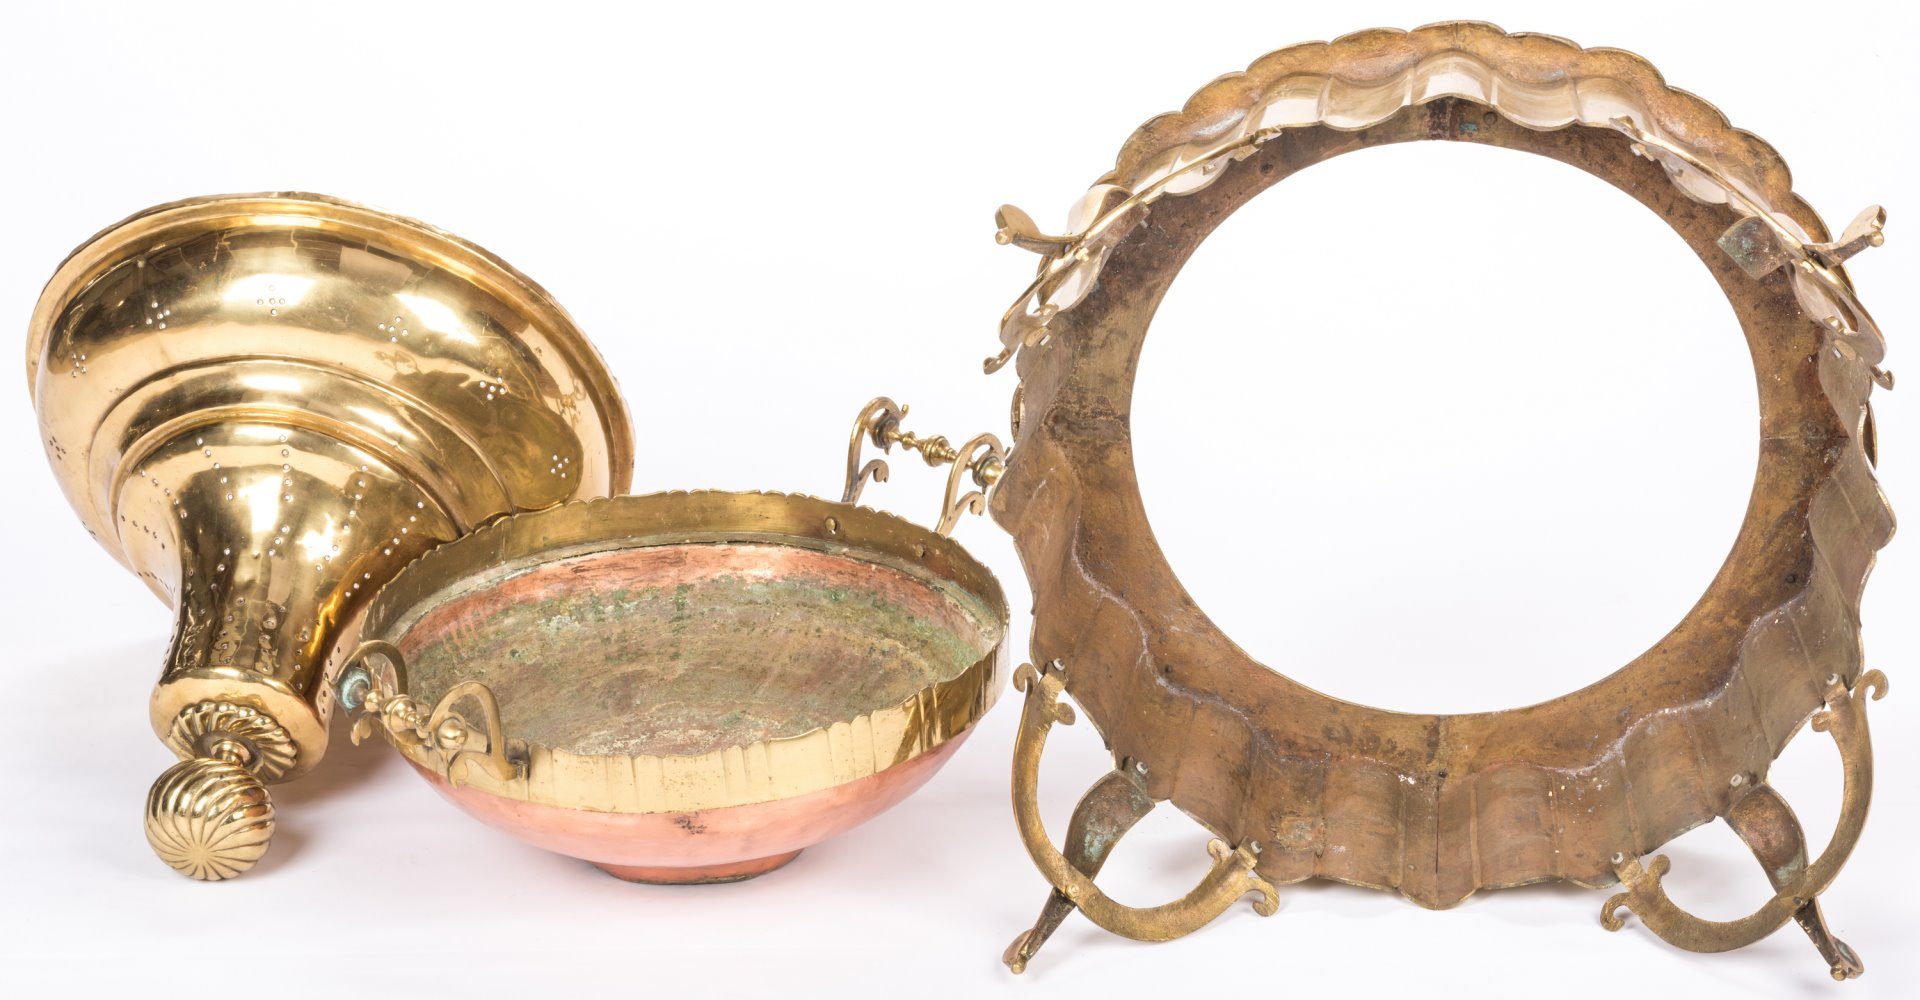 Lot 206: Large Brass Brazier or Censer with tray, 4 pcs.